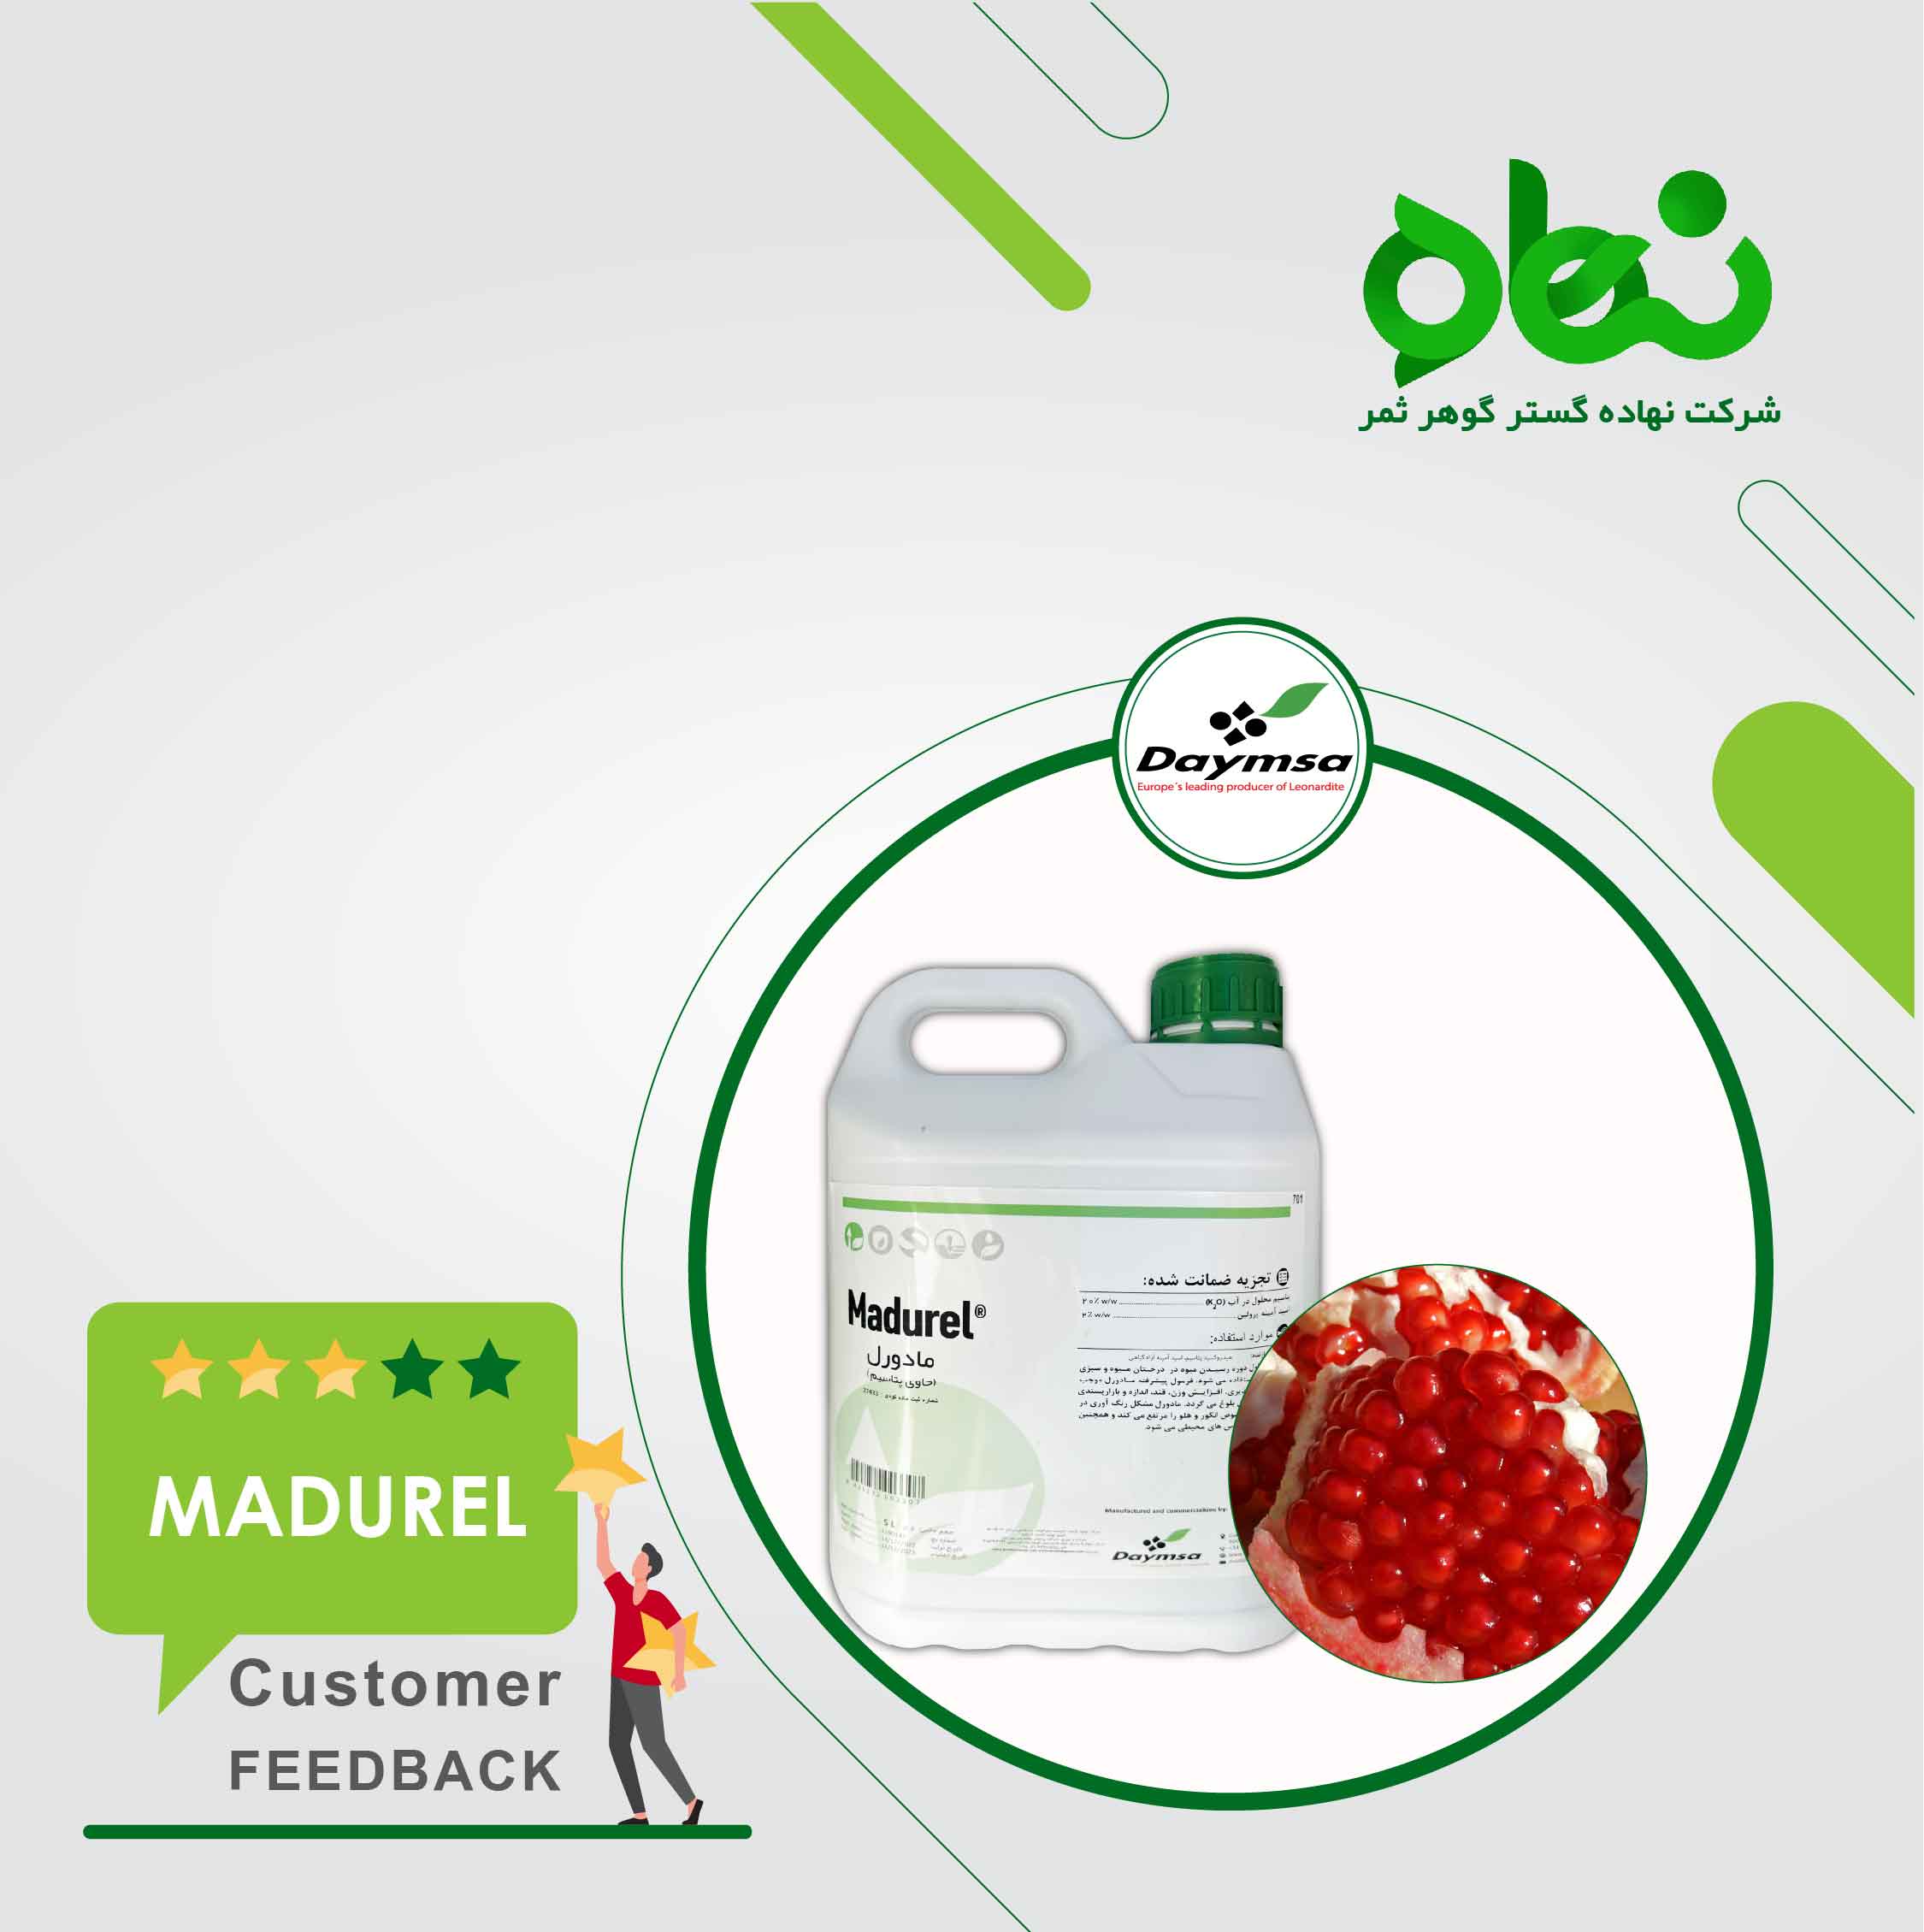 Customer satisfaction with the use of Madurel In the pomegranate